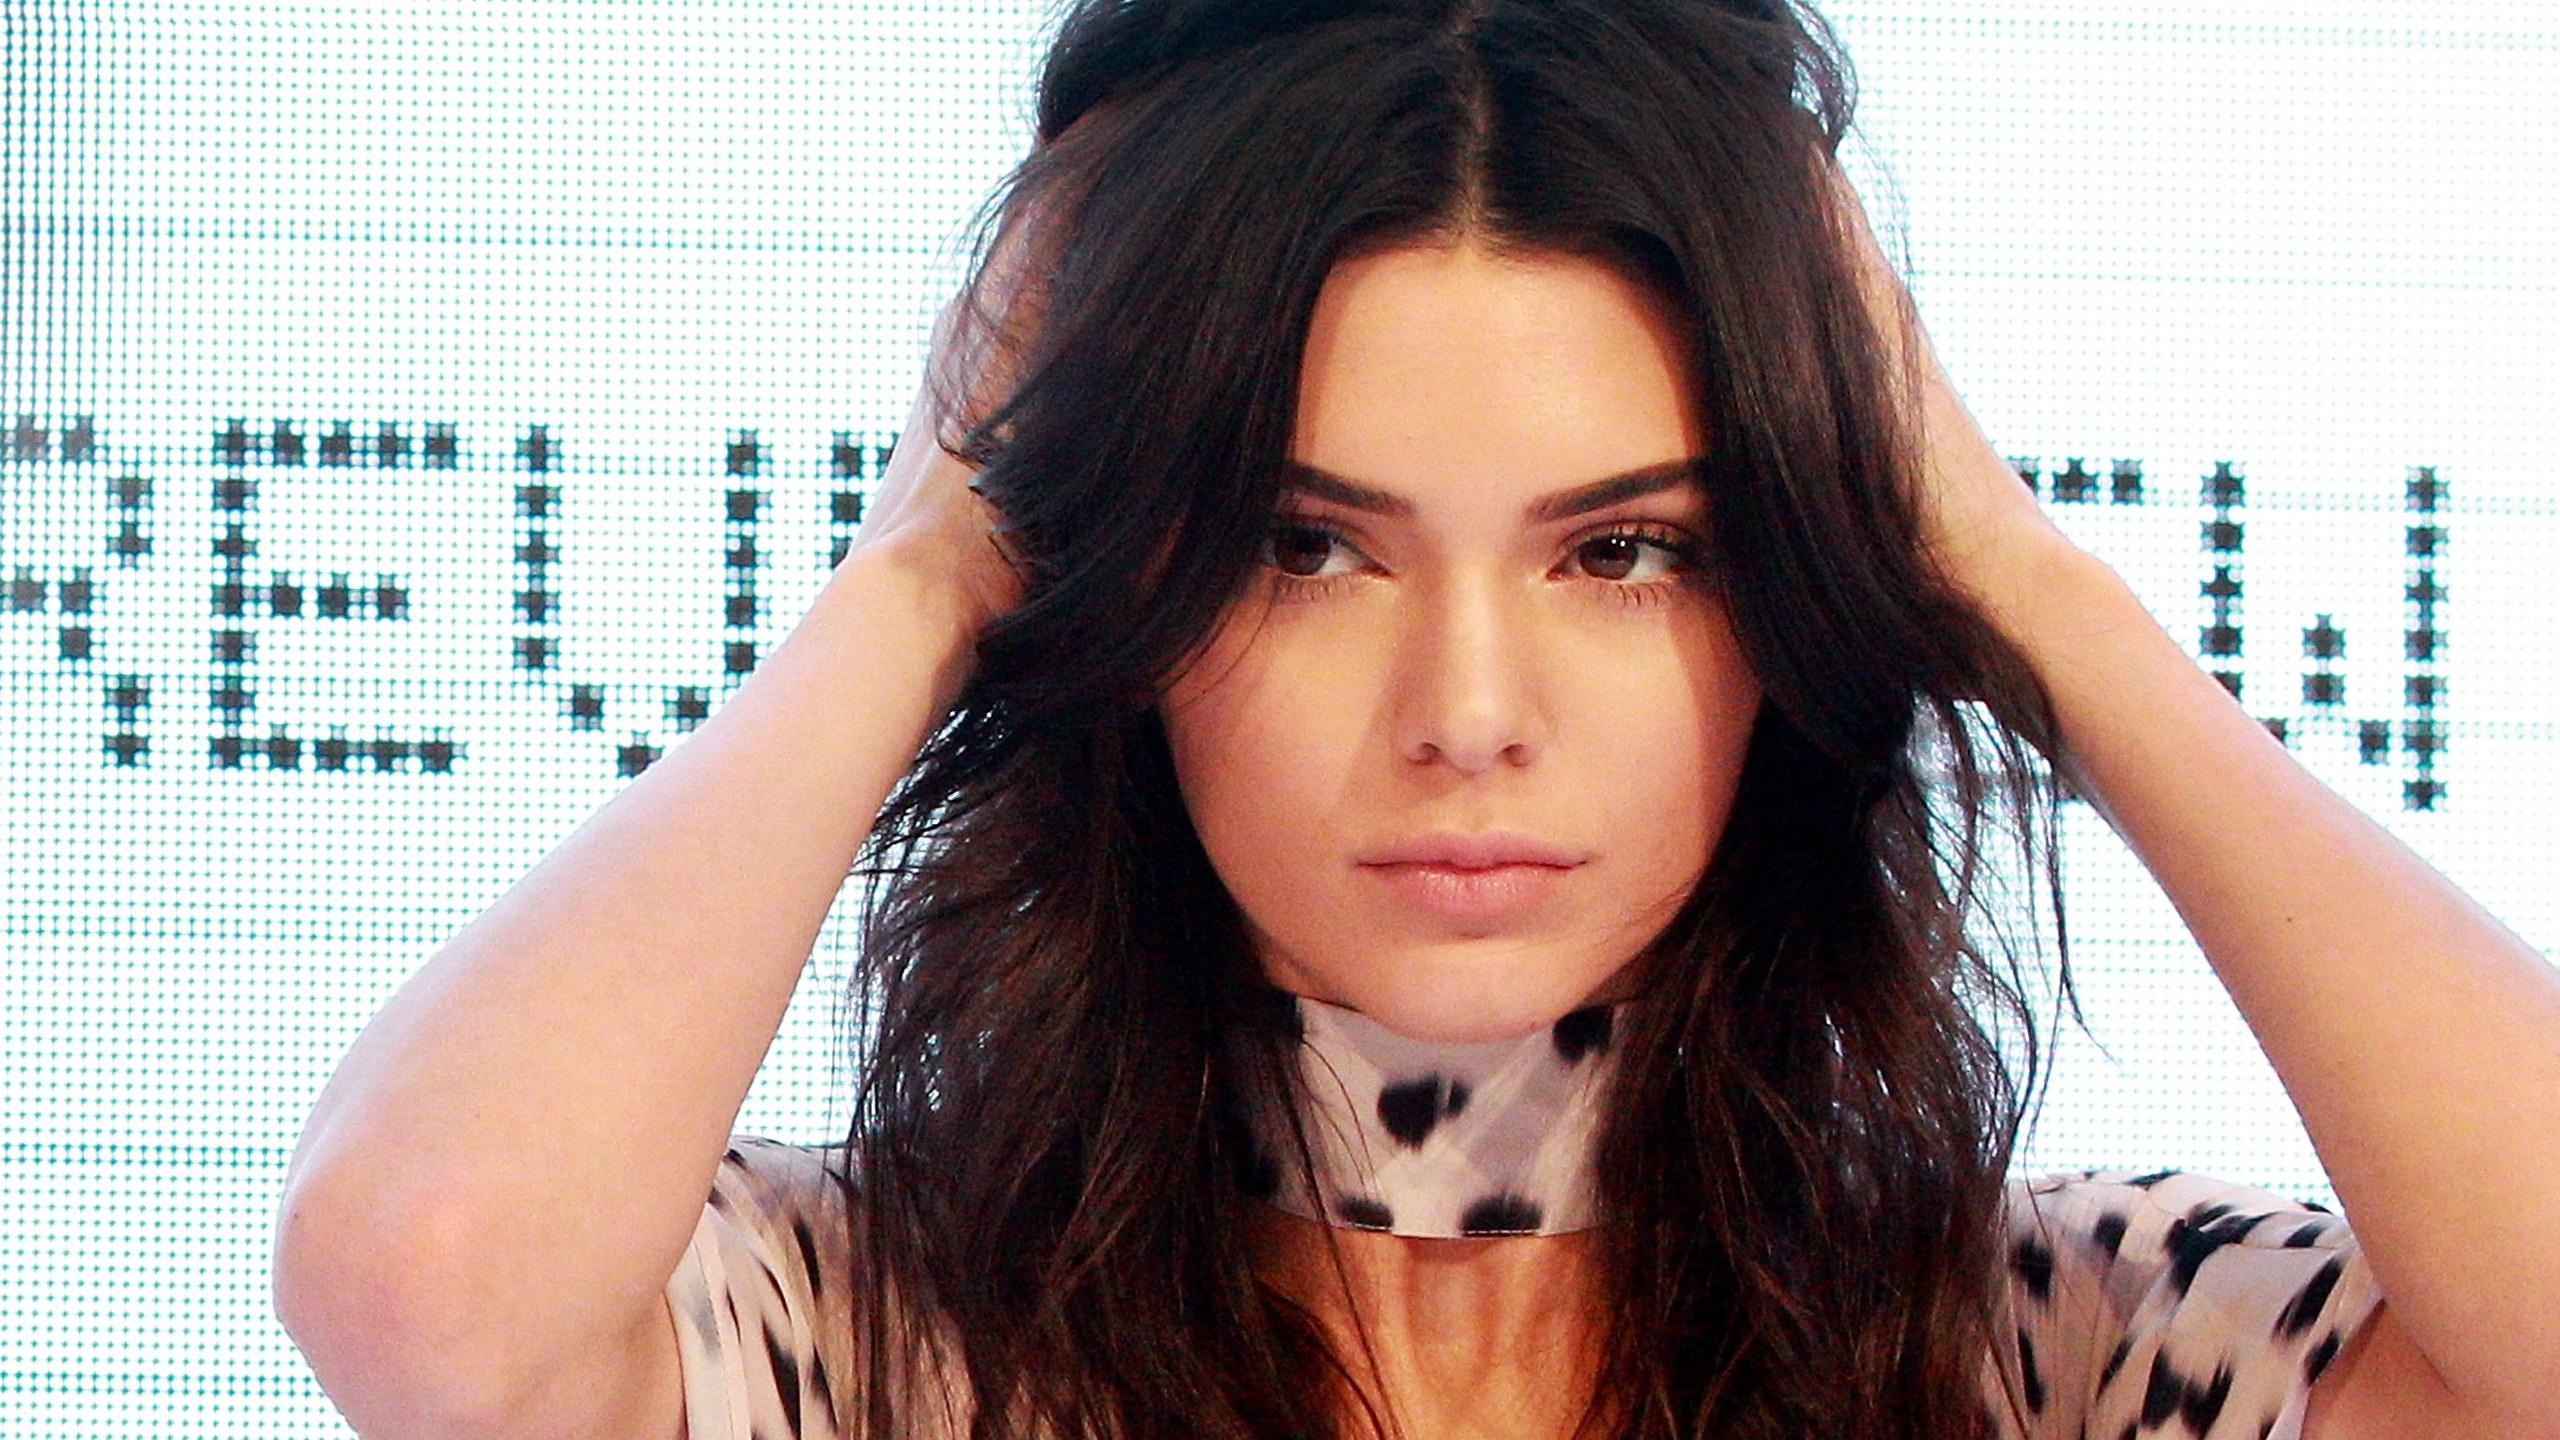 Relax about Kendall Jenner's Nipple(s)